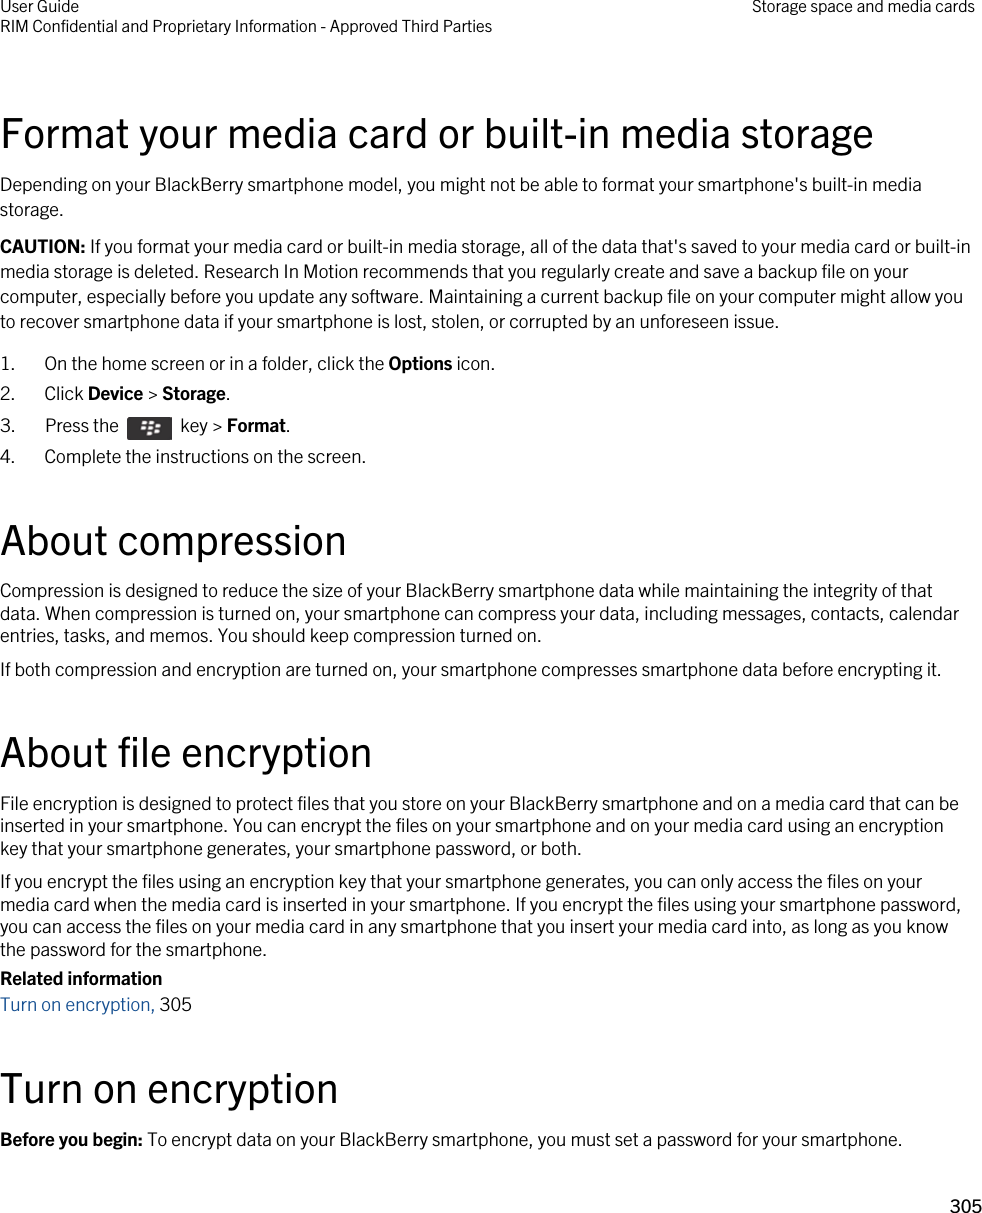 Format your media card or built-in media storageDepending on your BlackBerry smartphone model, you might not be able to format your smartphone&apos;s built-in media storage.CAUTION: If you format your media card or built-in media storage, all of the data that&apos;s saved to your media card or built-in media storage is deleted. Research In Motion recommends that you regularly create and save a backup file on your computer, especially before you update any software. Maintaining a current backup file on your computer might allow you to recover smartphone data if your smartphone is lost, stolen, or corrupted by an unforeseen issue.1. On the home screen or in a folder, click the Options icon.2. Click Device &gt; Storage.3.  Press the    key &gt; Format. 4. Complete the instructions on the screen.About compressionCompression is designed to reduce the size of your BlackBerry smartphone data while maintaining the integrity of that data. When compression is turned on, your smartphone can compress your data, including messages, contacts, calendar entries, tasks, and memos. You should keep compression turned on.If both compression and encryption are turned on, your smartphone compresses smartphone data before encrypting it.About file encryptionFile encryption is designed to protect files that you store on your BlackBerry smartphone and on a media card that can be inserted in your smartphone. You can encrypt the files on your smartphone and on your media card using an encryption key that your smartphone generates, your smartphone password, or both.If you encrypt the files using an encryption key that your smartphone generates, you can only access the files on your media card when the media card is inserted in your smartphone. If you encrypt the files using your smartphone password, you can access the files on your media card in any smartphone that you insert your media card into, as long as you know the password for the smartphone.Related informationTurn on encryption, 305Turn on encryptionBefore you begin: To encrypt data on your BlackBerry smartphone, you must set a password for your smartphone.User GuideRIM Confidential and Proprietary Information - Approved Third Parties Storage space and media cards305 